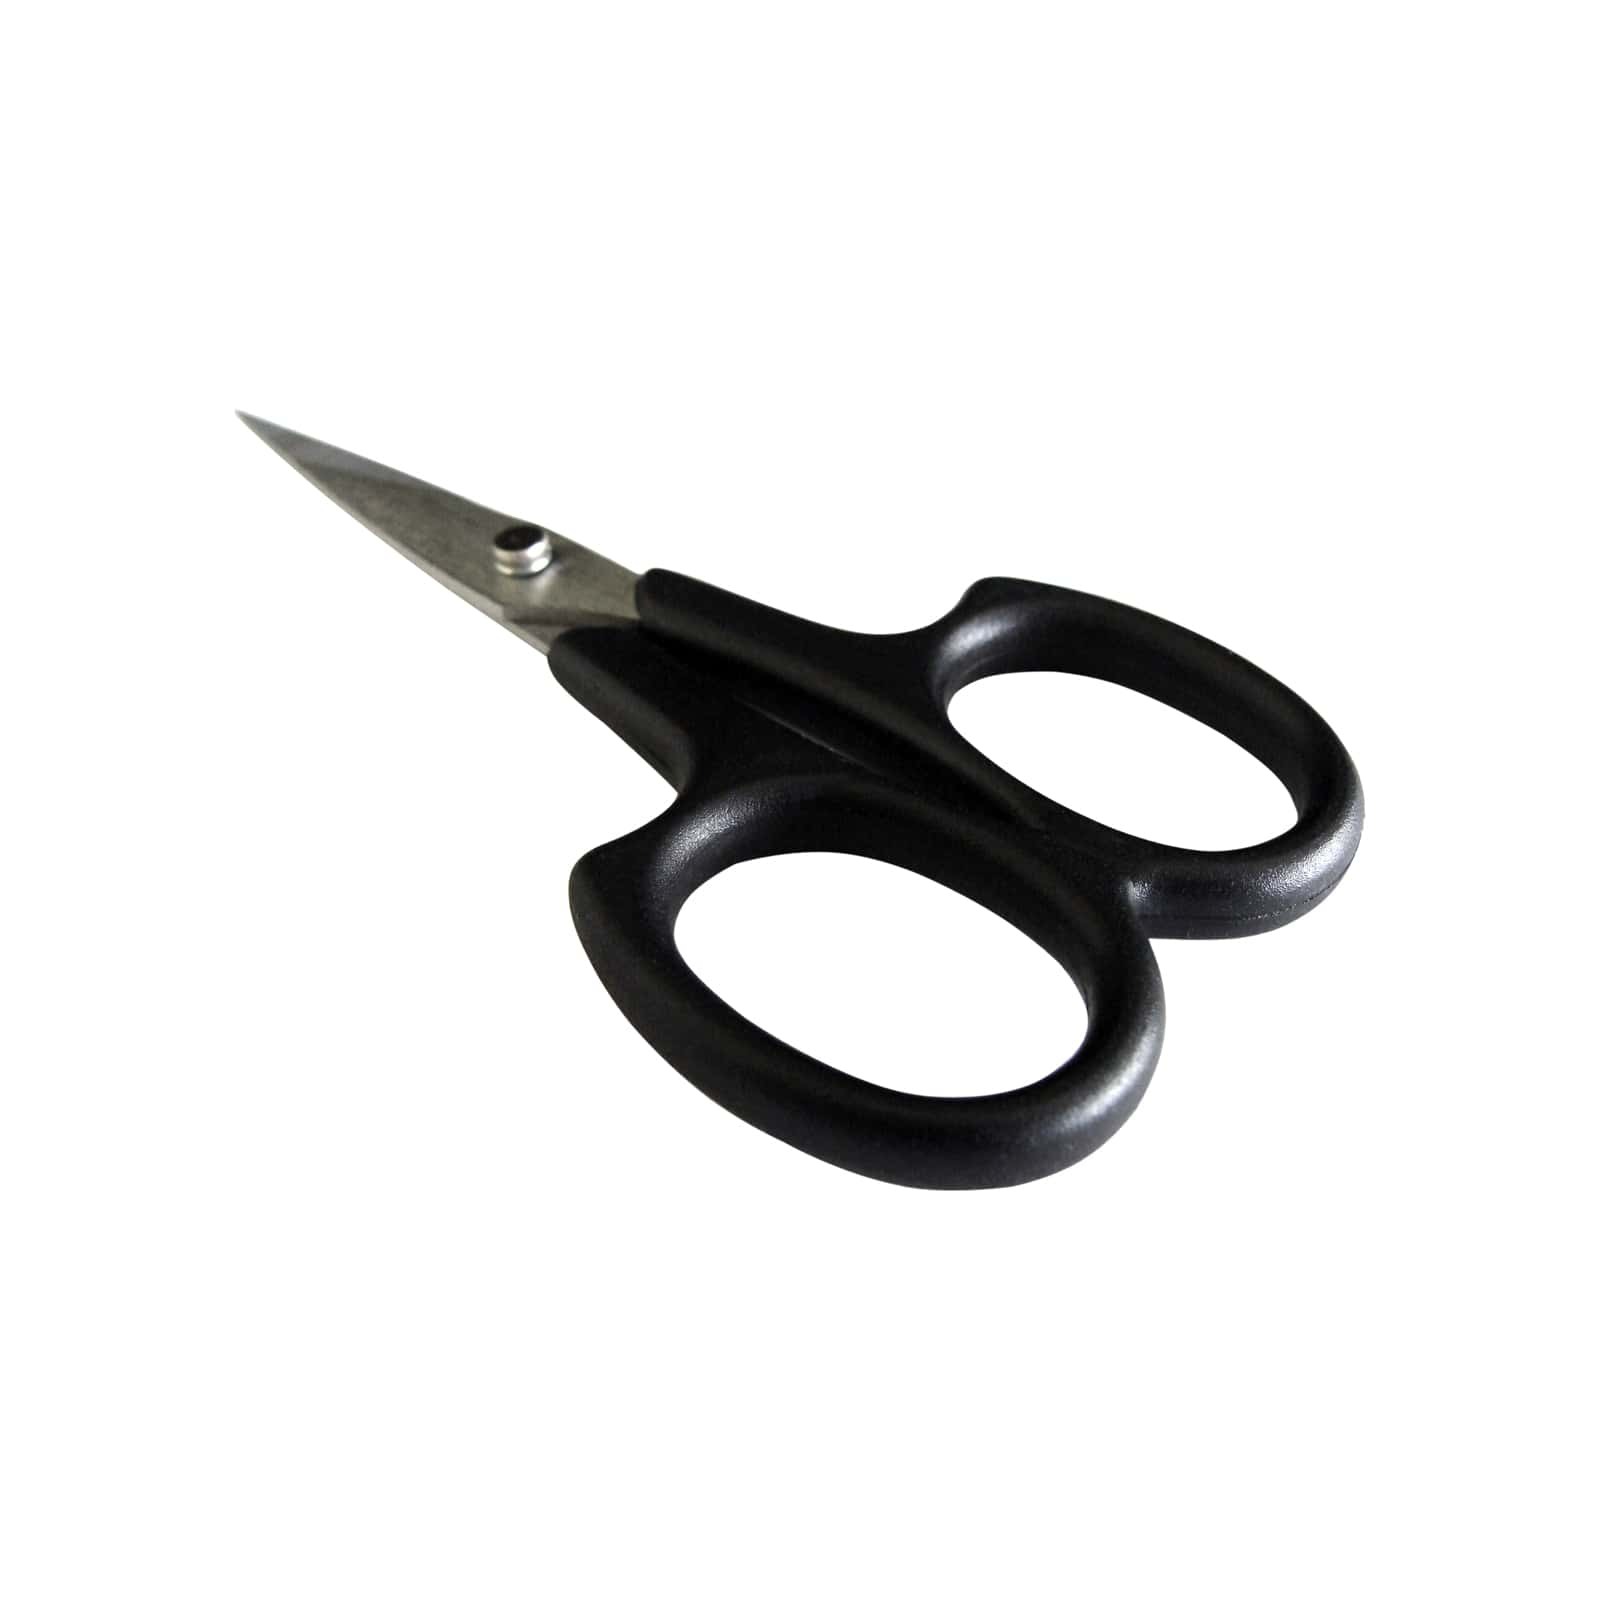 Sharp and Small: Scissors for Hand Embroidery –